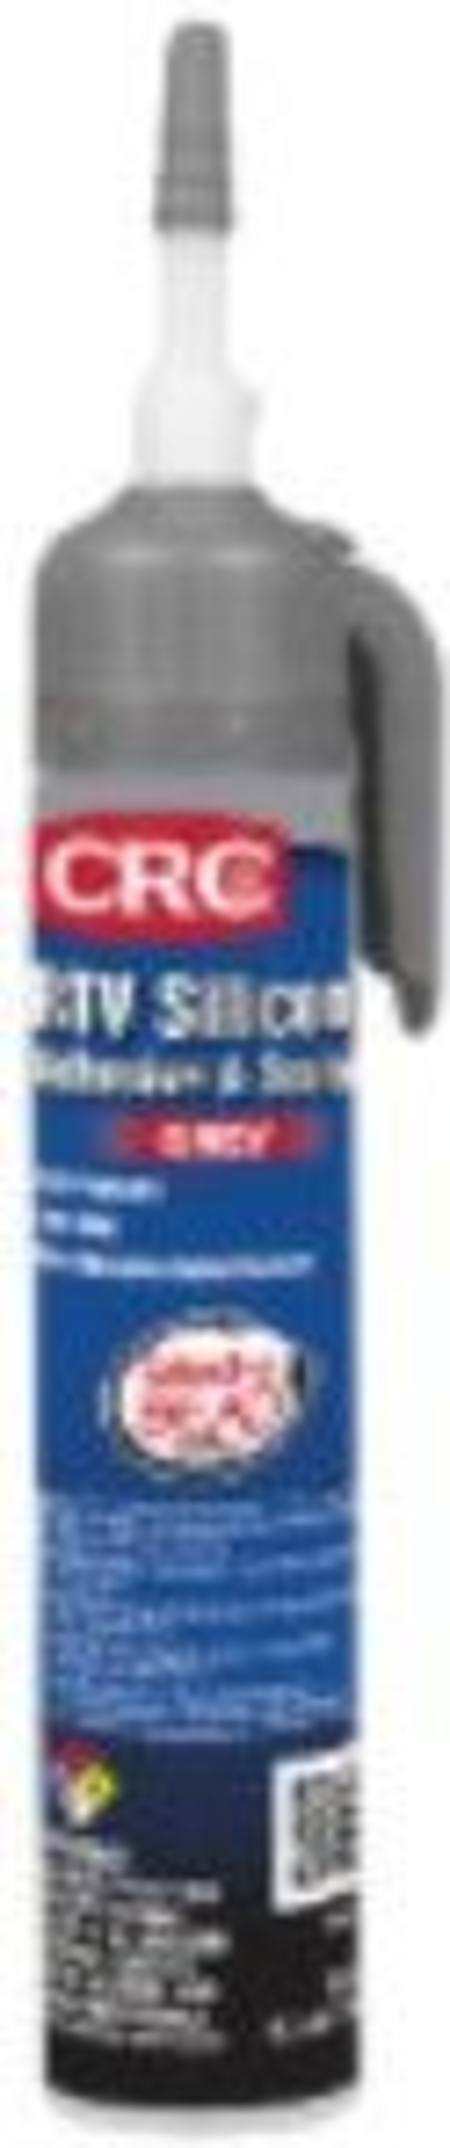 Buy CRC GREY RTV SILICONE SELECT-A-BEAD 184g in NZ. 